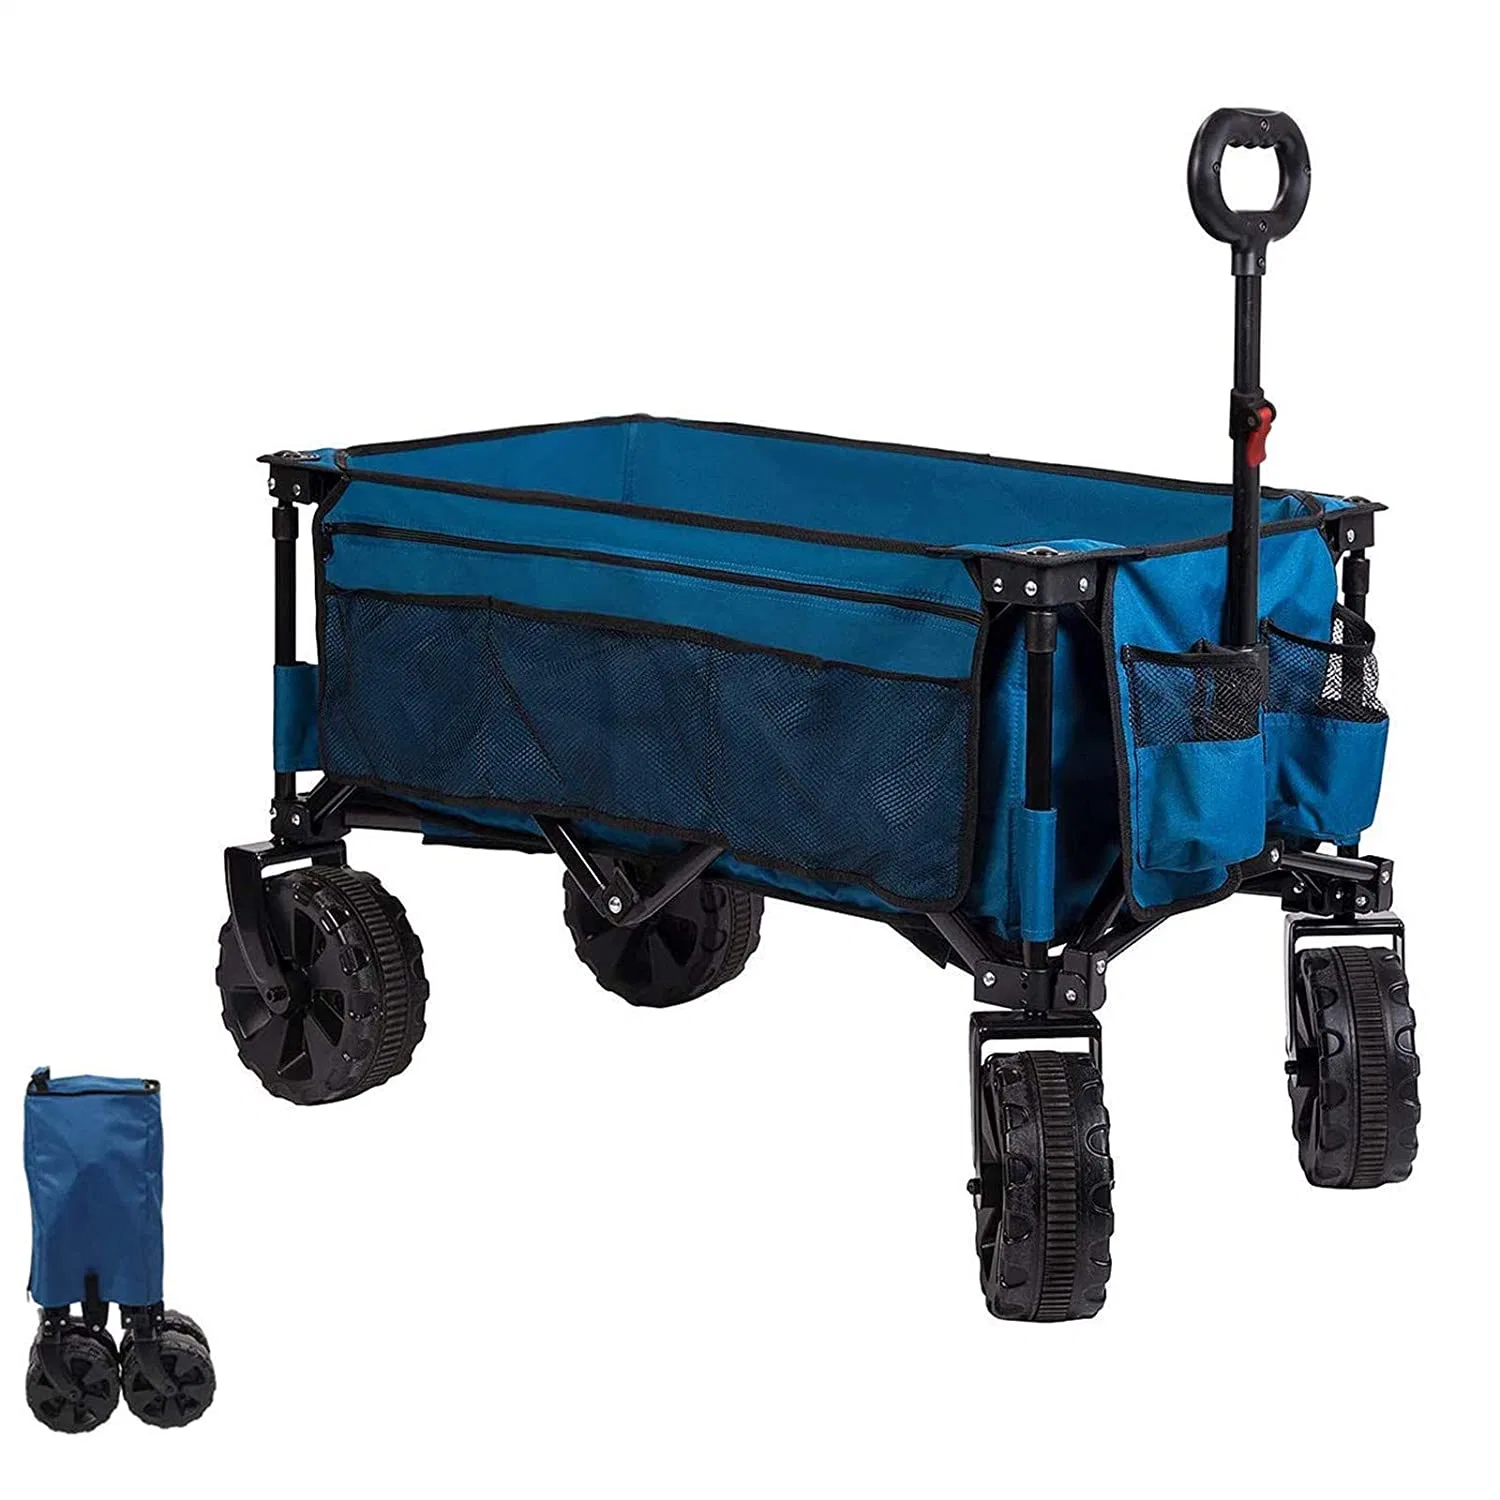 Garden Collapsible Folding Outdoor Utility Beach Trolley Wagon with Cover Bag